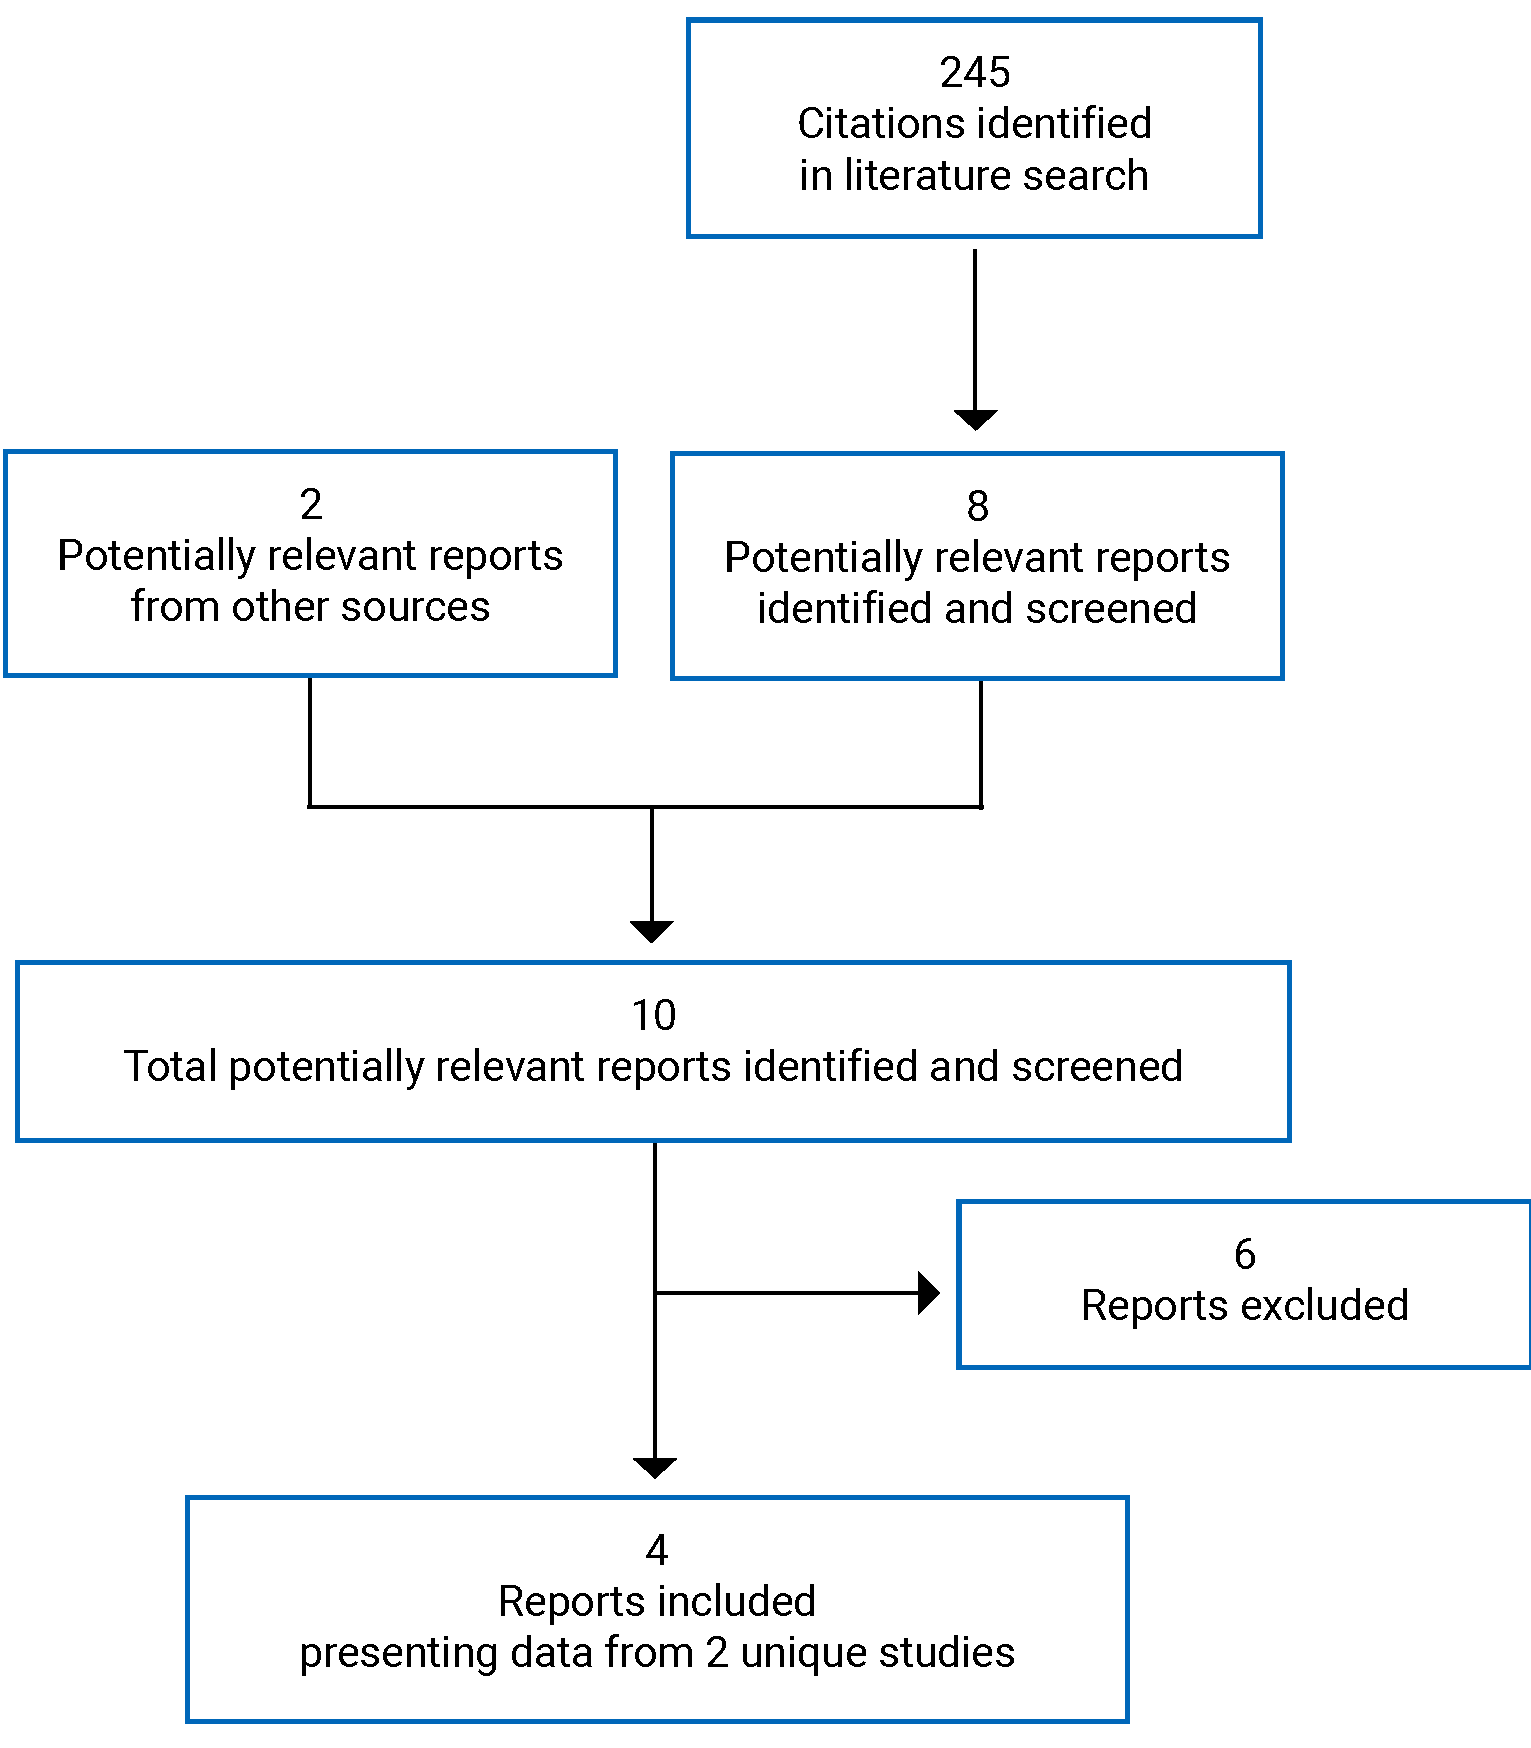 Two hundred and 45 citations were identified in the literature search and 2 additional potentially relevant reports were identified from other sources. In total 4 reports presenting data from 2 unique studies were included in the review.